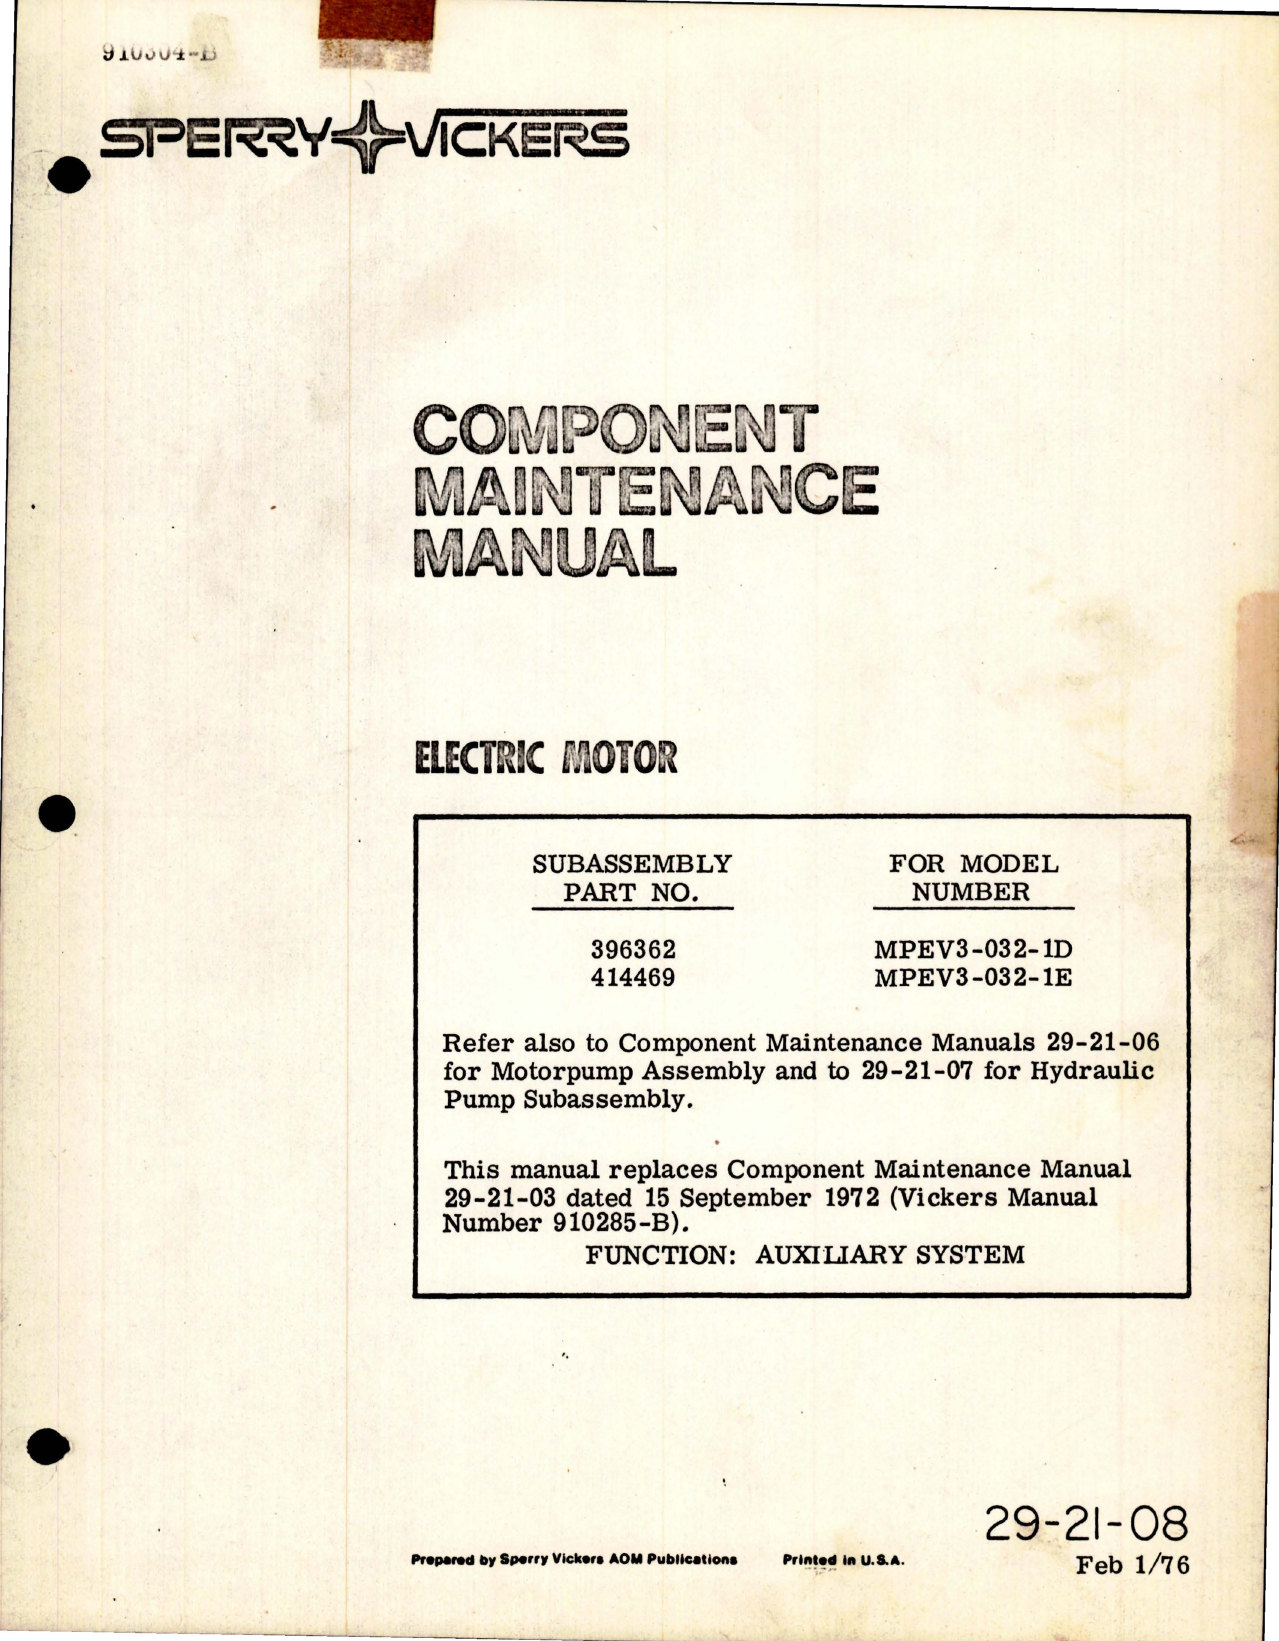 Sample page 1 from AirCorps Library document: Component Maintenance Manual for Electric Motor - Part 396362 and 414469 